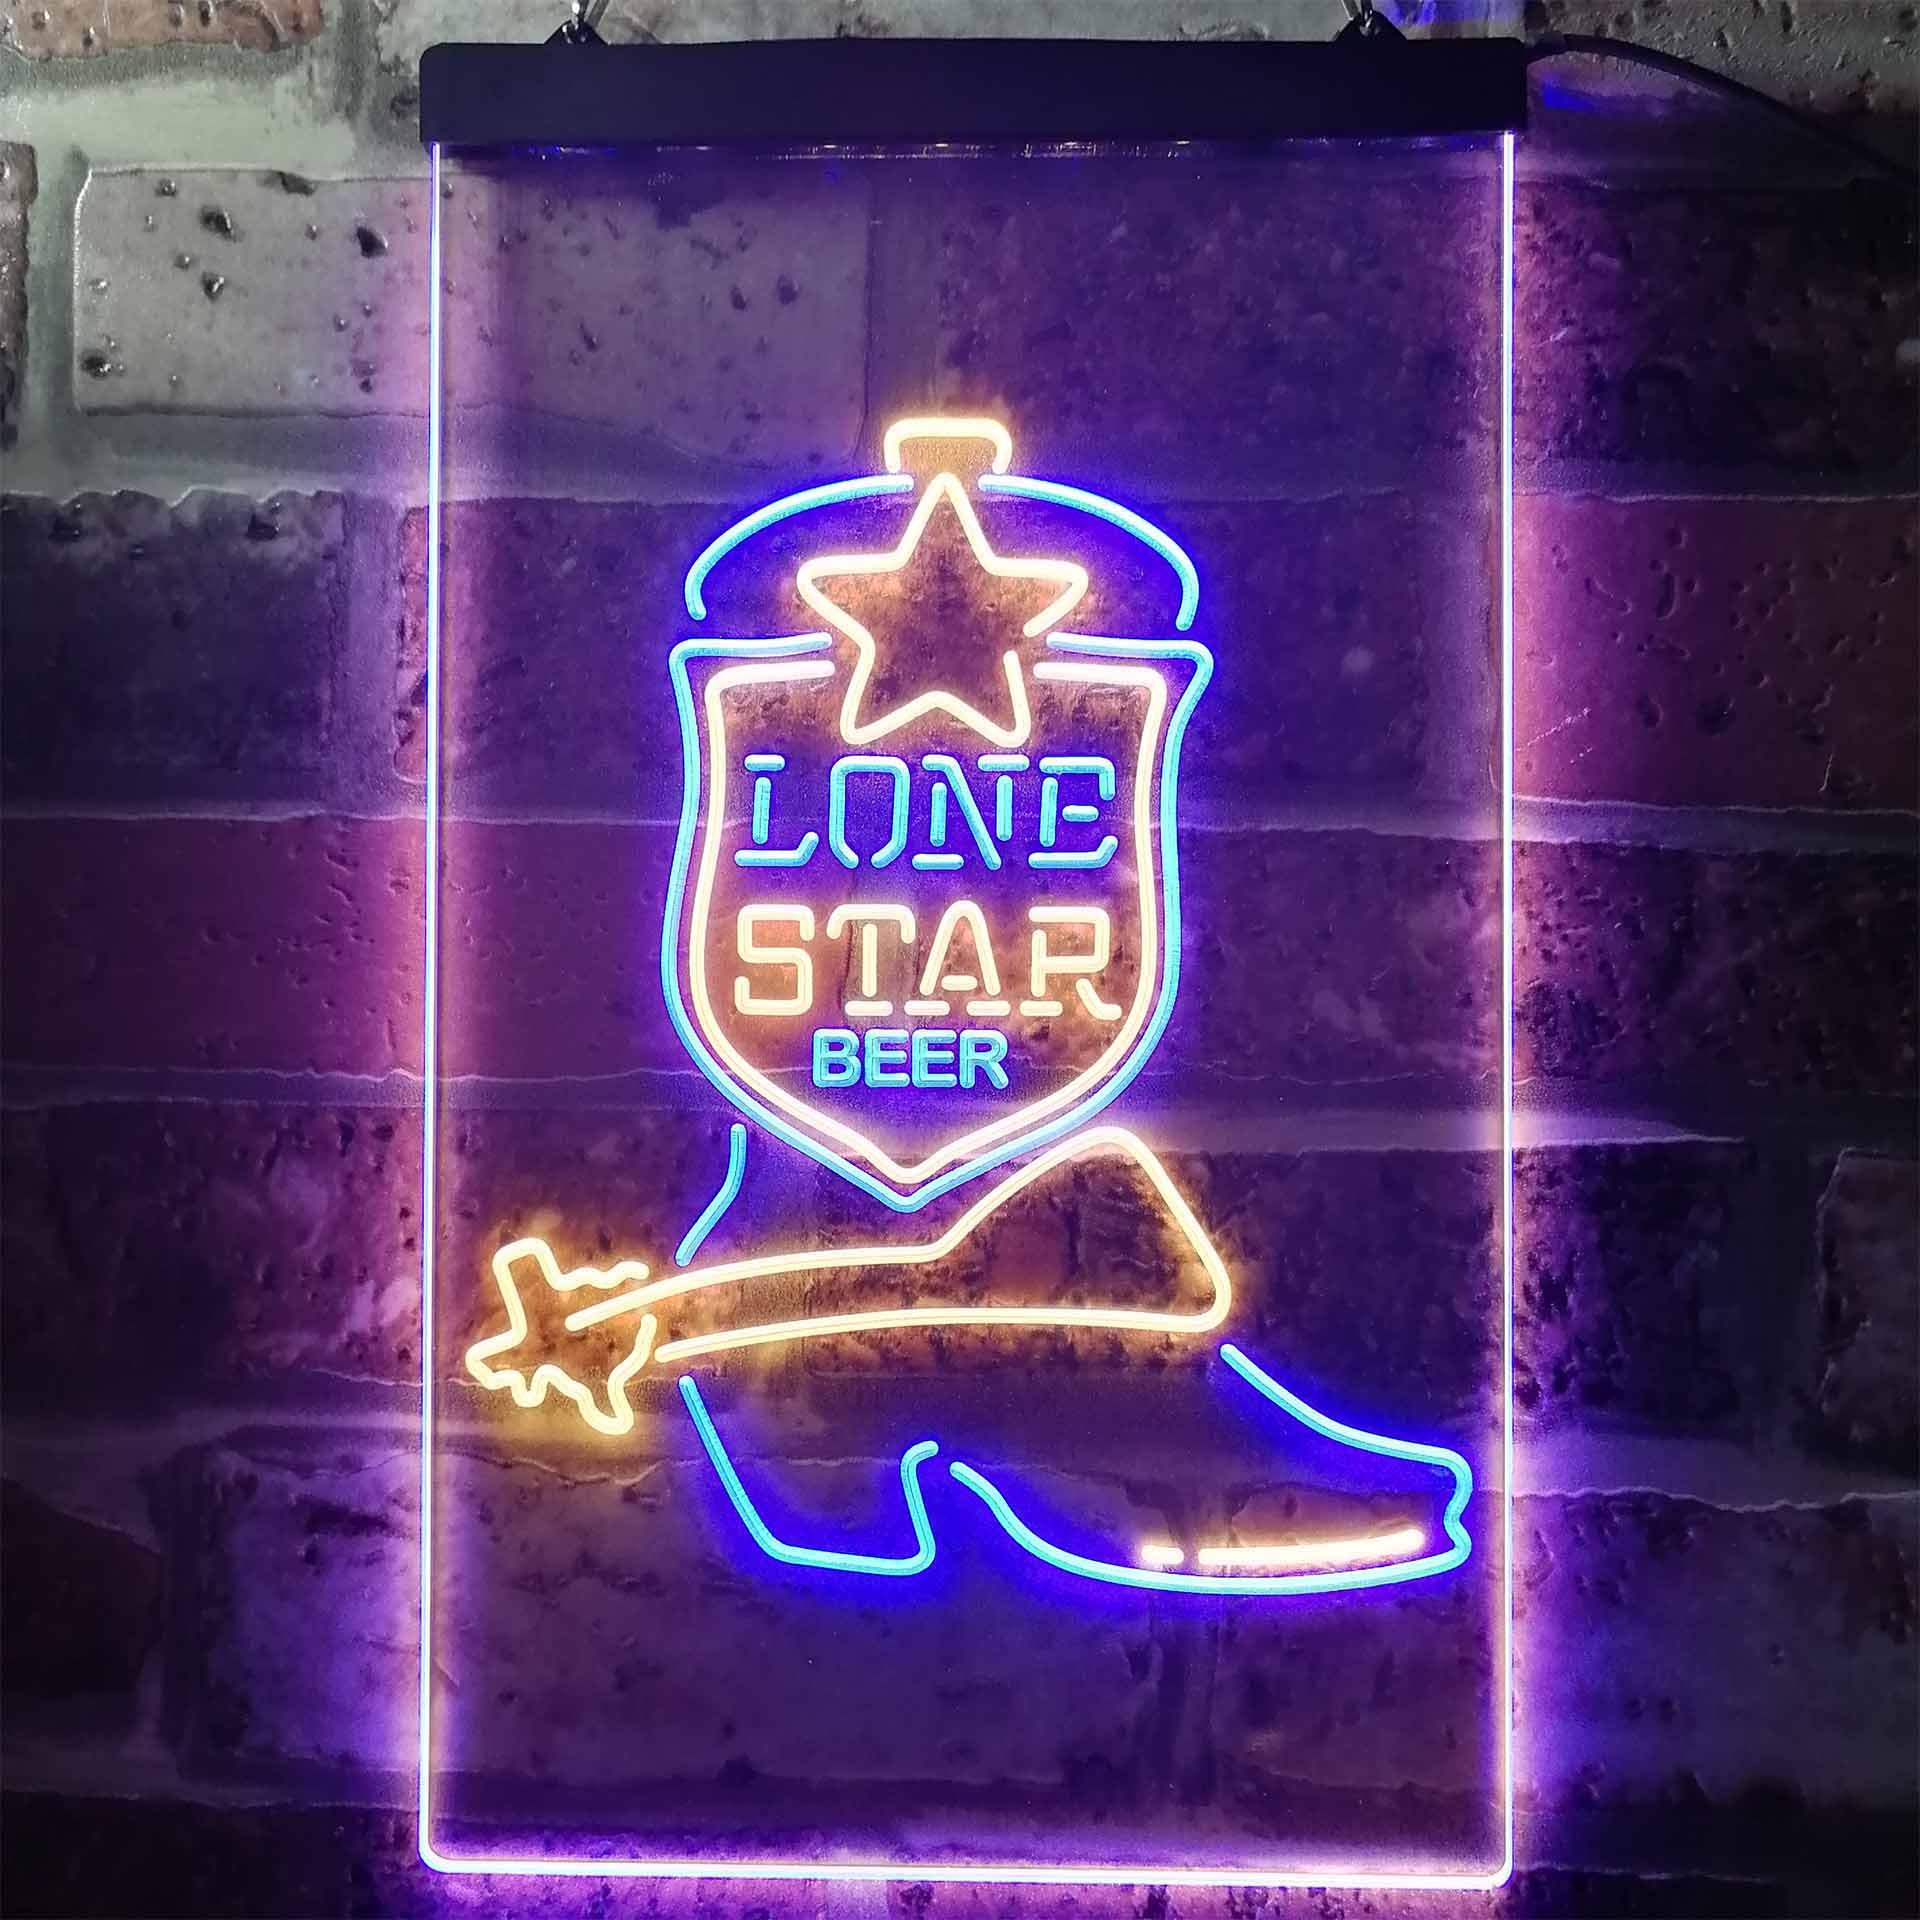 Lone Star Boot Beer Bar LED Neon Sign